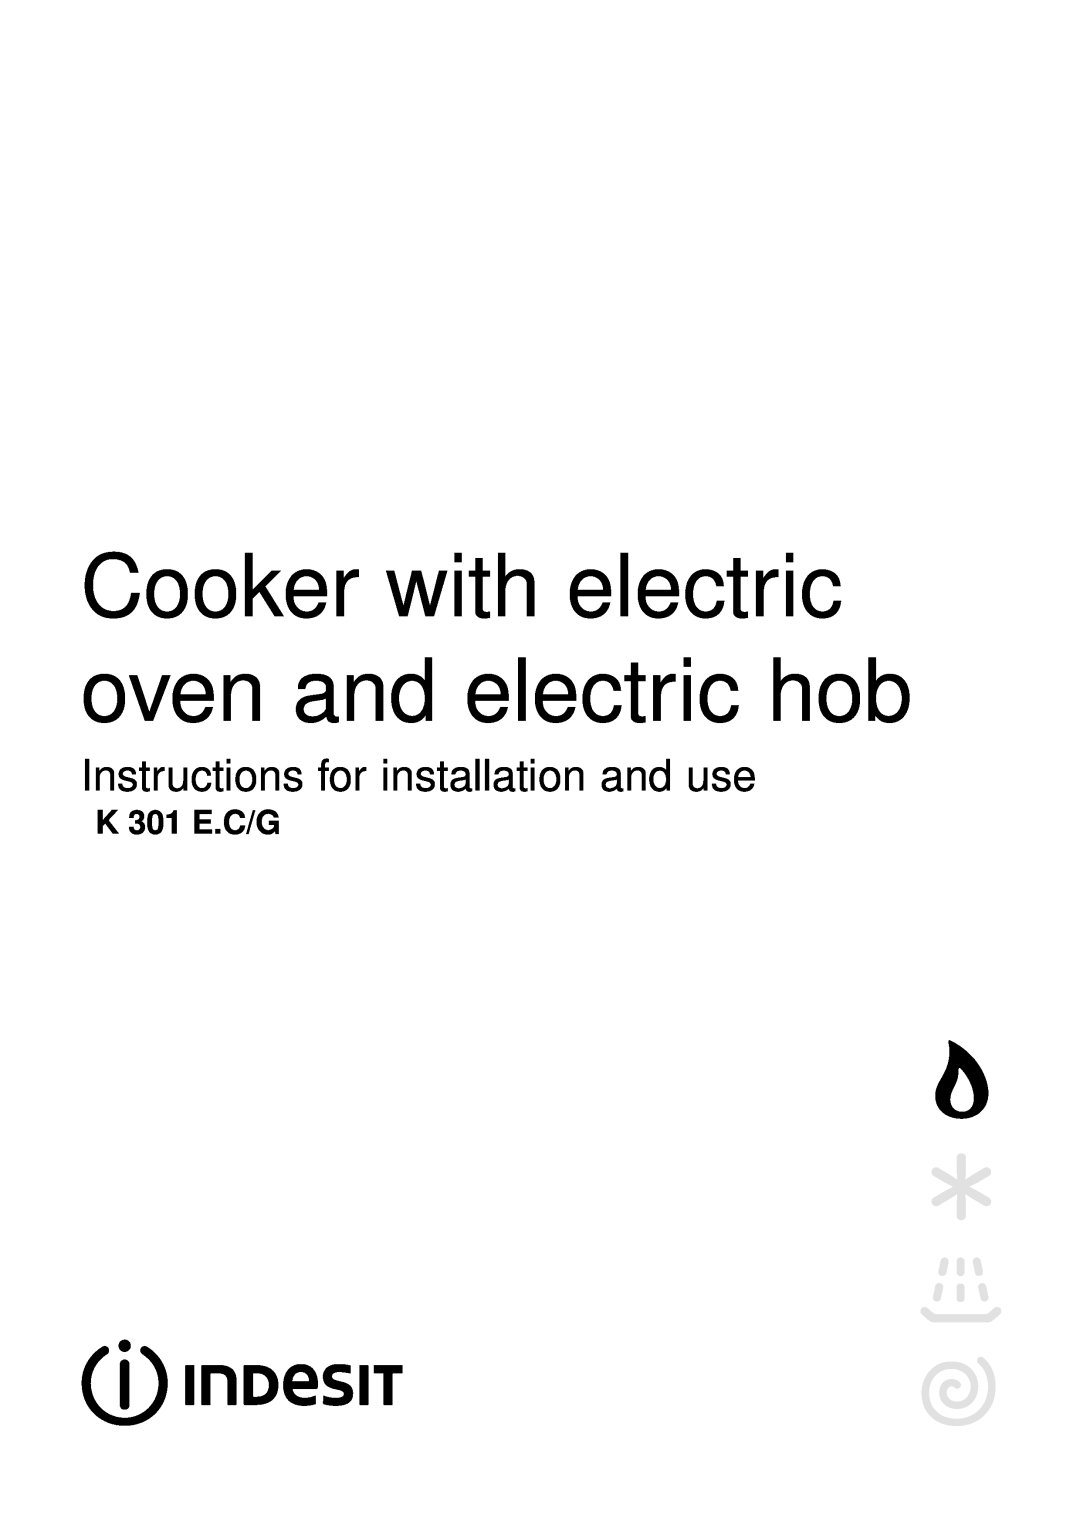 Indesit K 301 E.C/G manual Cooker with electric oven and electric hob, Instructions for installation and use 